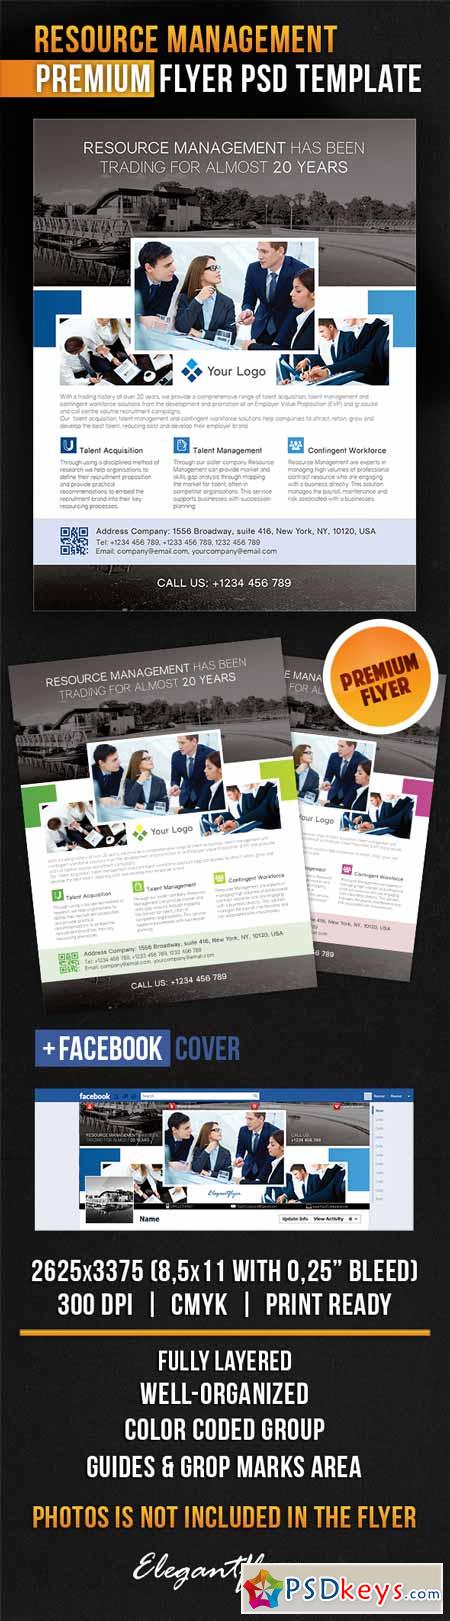 Resource Management  Flyer PSD Template + Facebook Cover